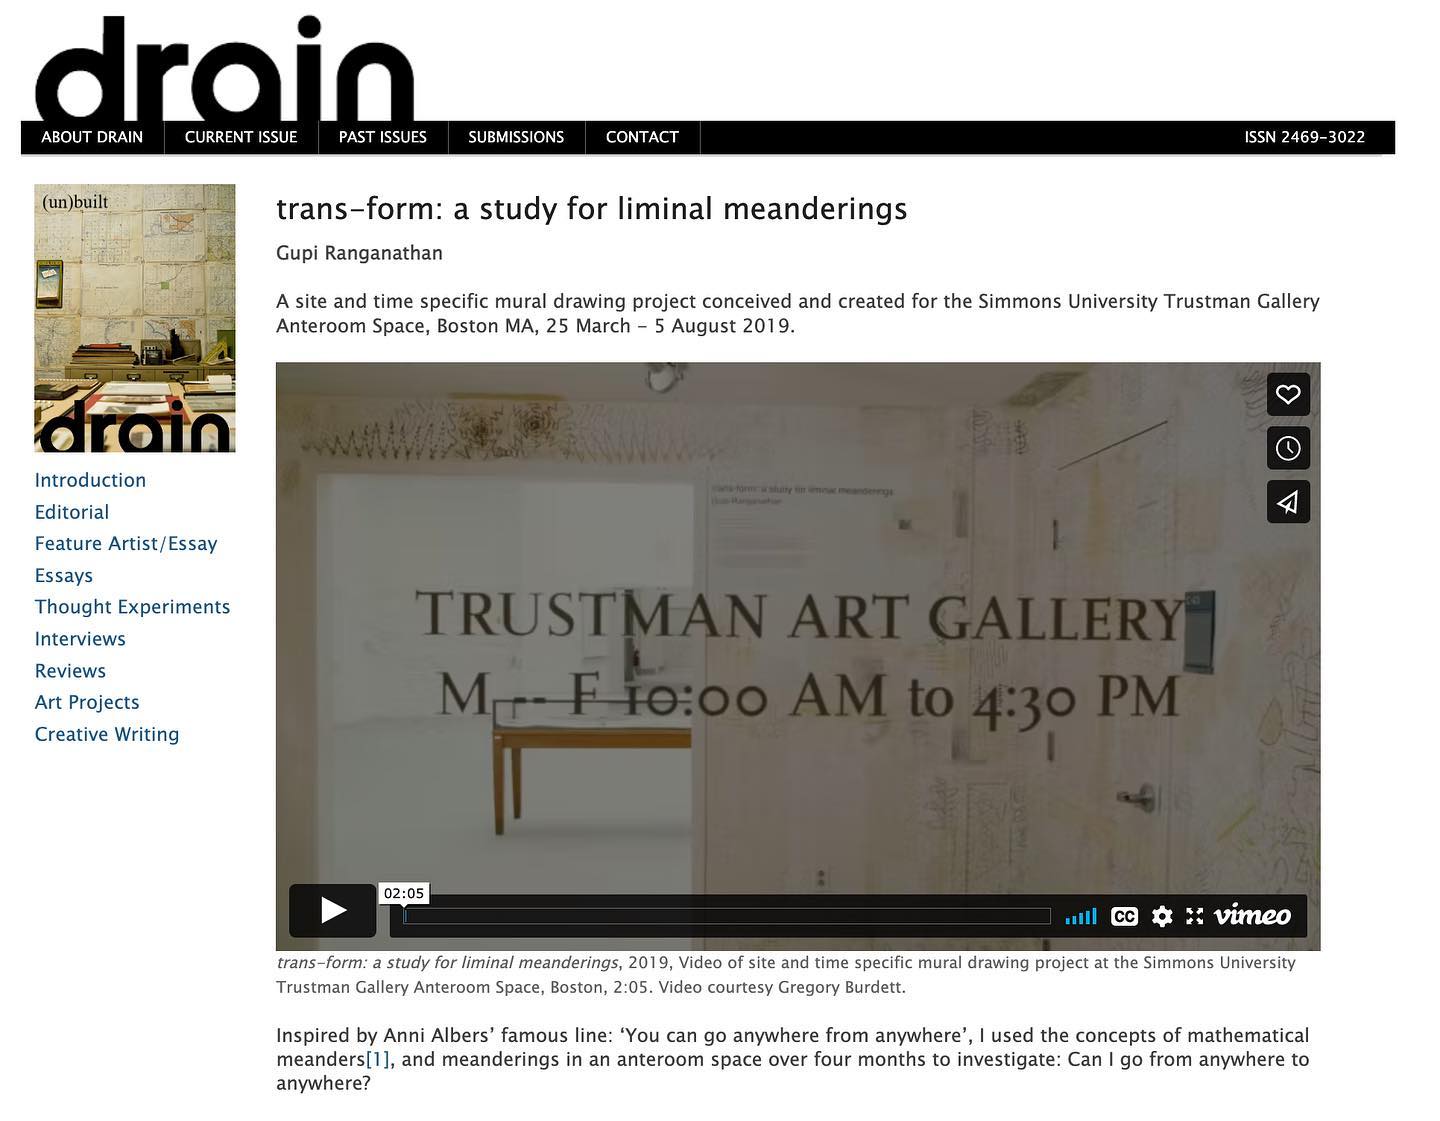 Drain magazine - transform: A study for liminal meanderings